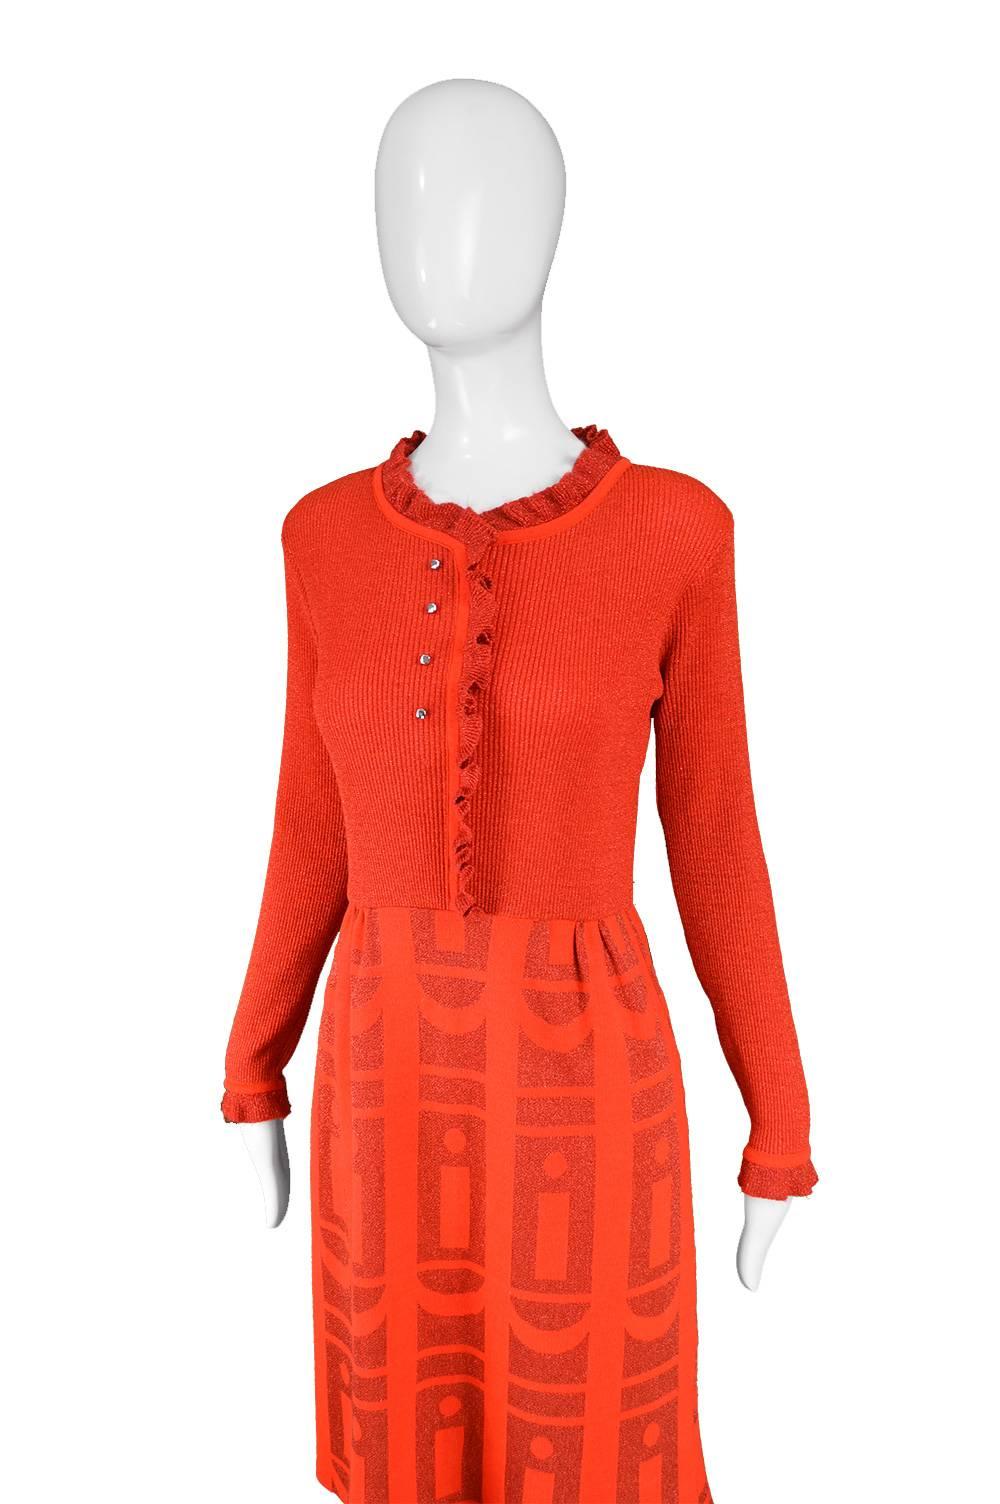 Louis Feraud 1970s Vintage Red Knit Dress In Excellent Condition For Sale In Doncaster, South Yorkshire